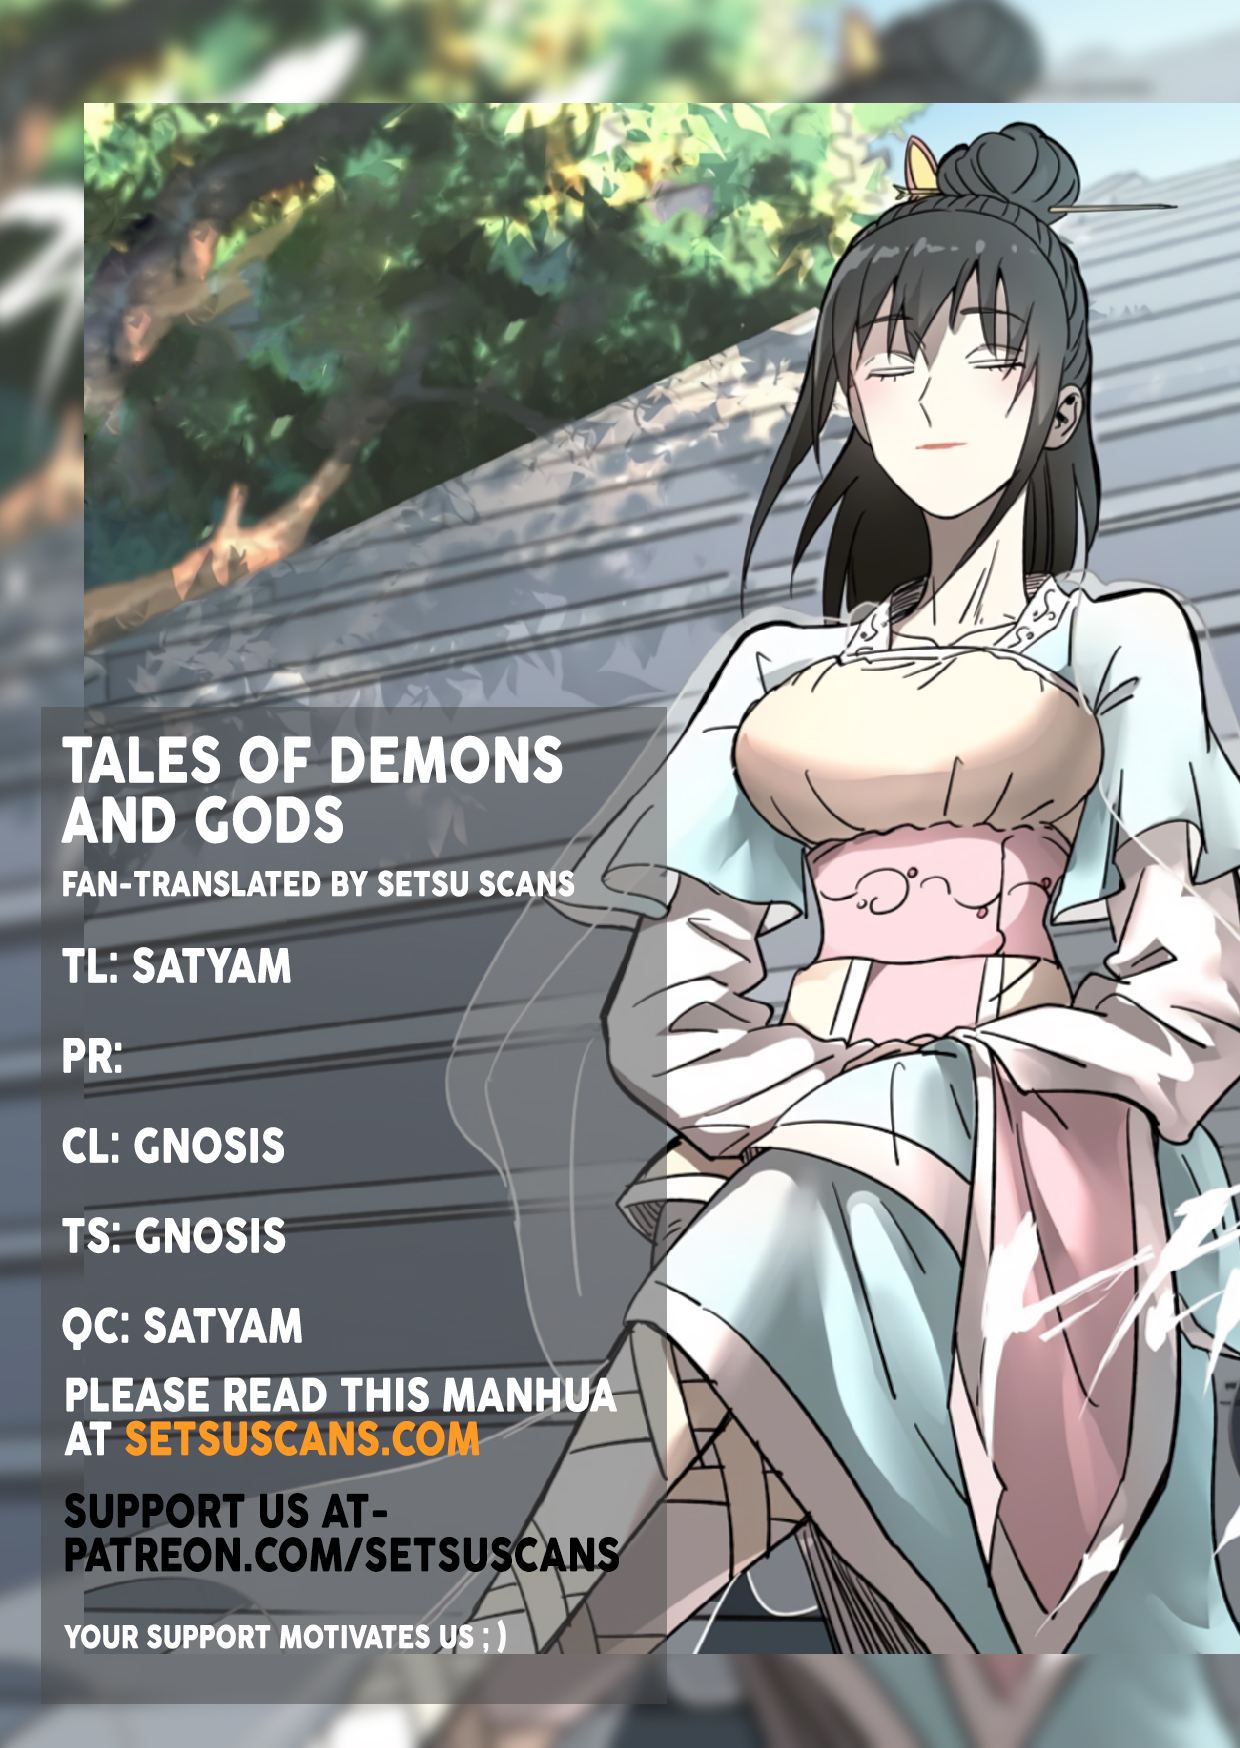 Tales of Demons and Gods - Chapter 24471 - Contest (2) - Image 1